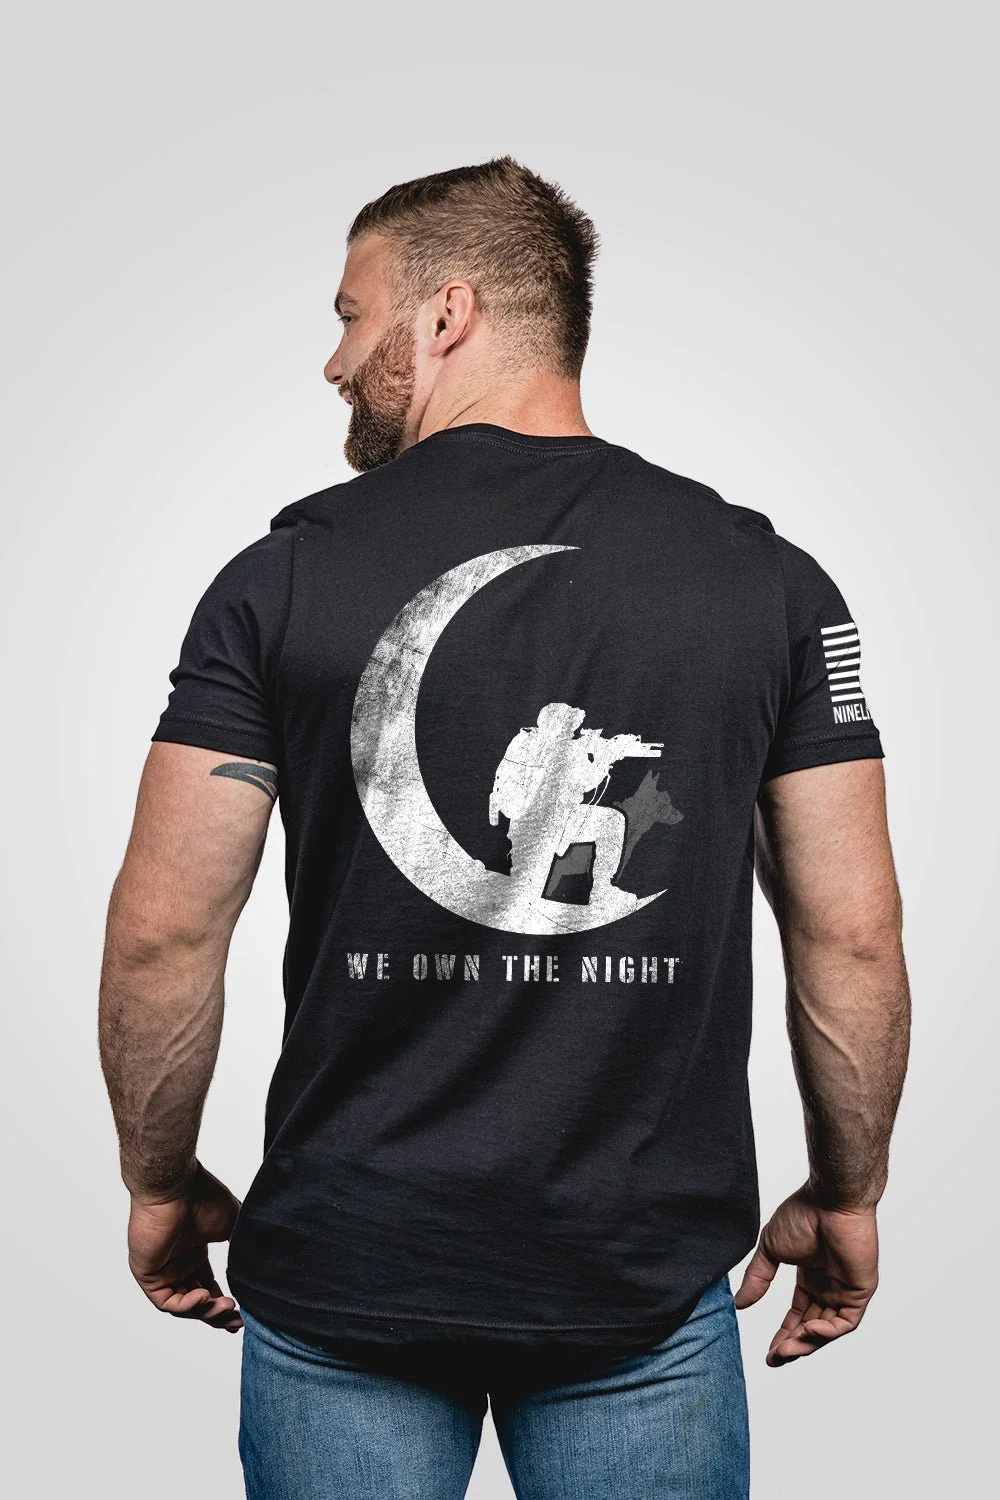 Nine Line Men's T-Shirt - We Own the Night posted by ProdOrigin USA in Men's Apparel